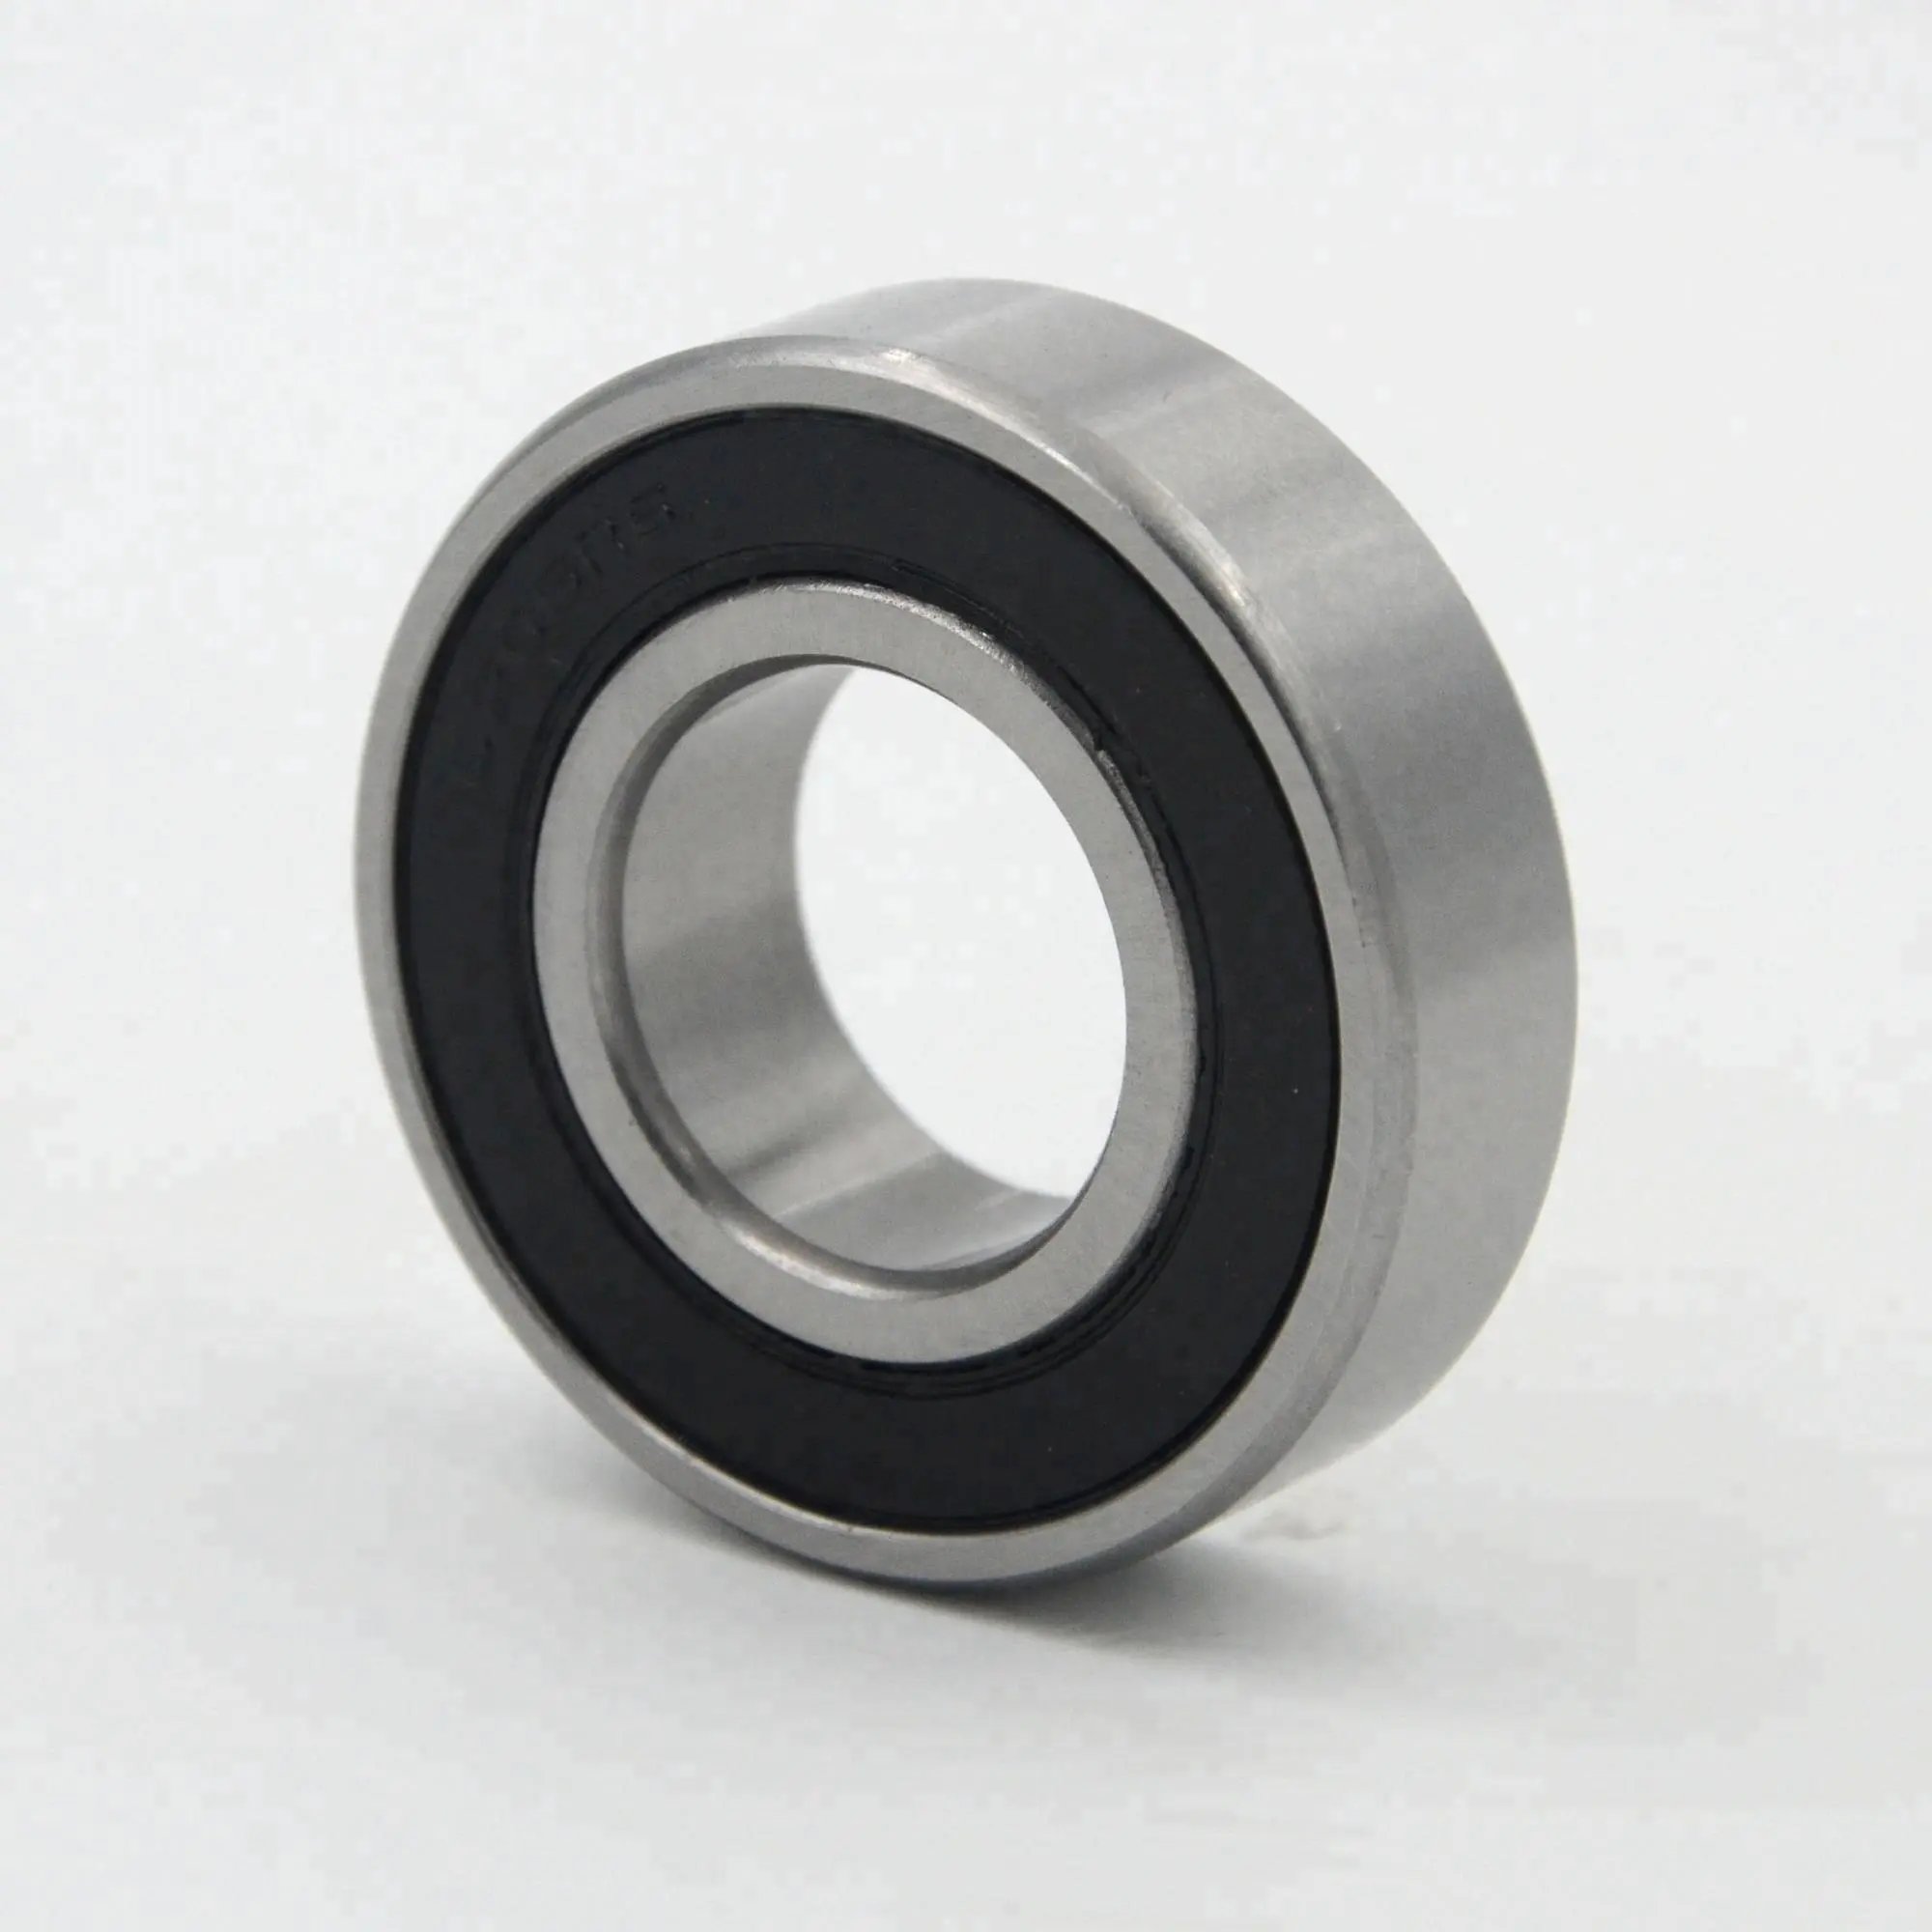 Factory direct price Free samples Low friction deep groove ball nbc bearing price list 688 2ZR 2RSR